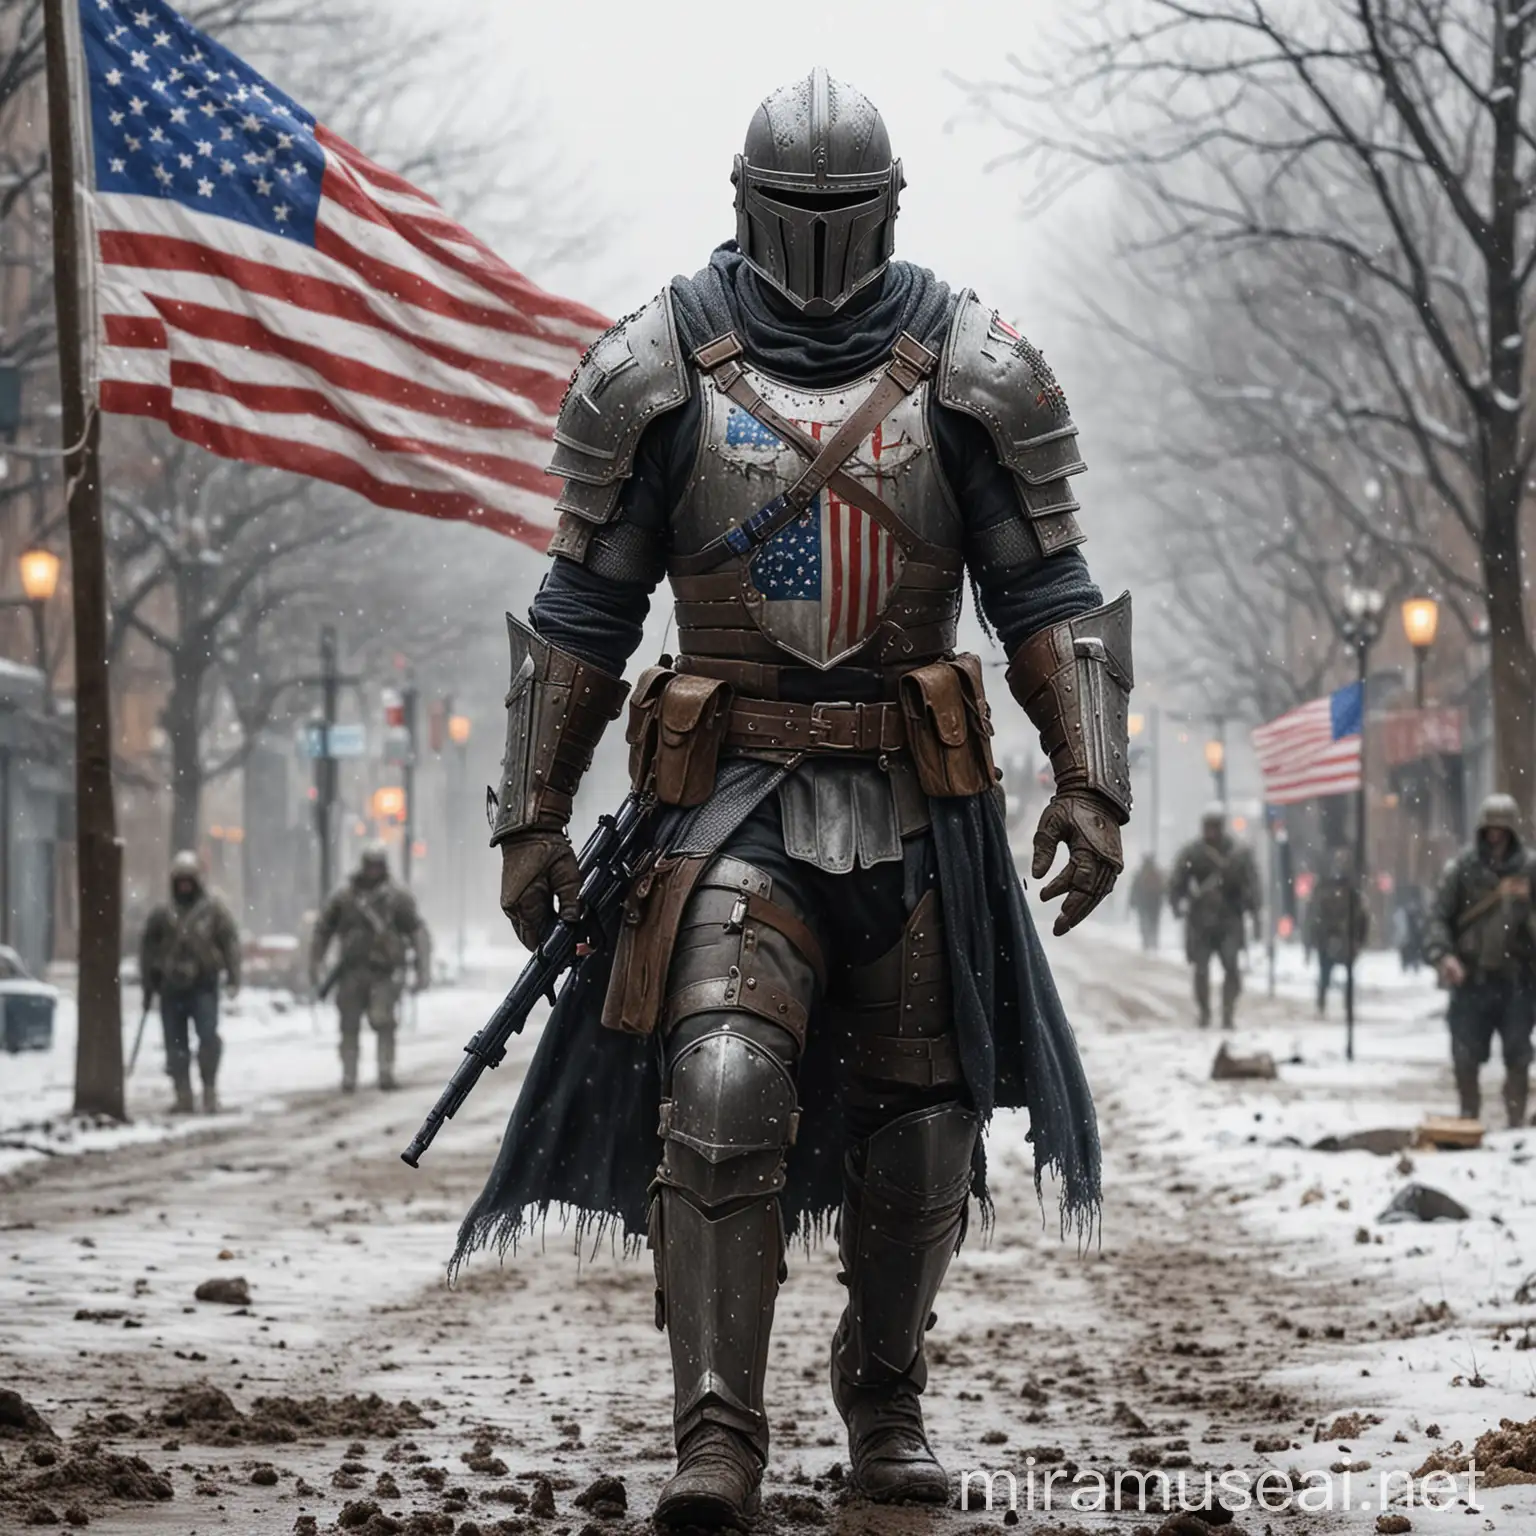 Modern Holy Knight Soldier in USA Colors Amid Snowy Cityscape